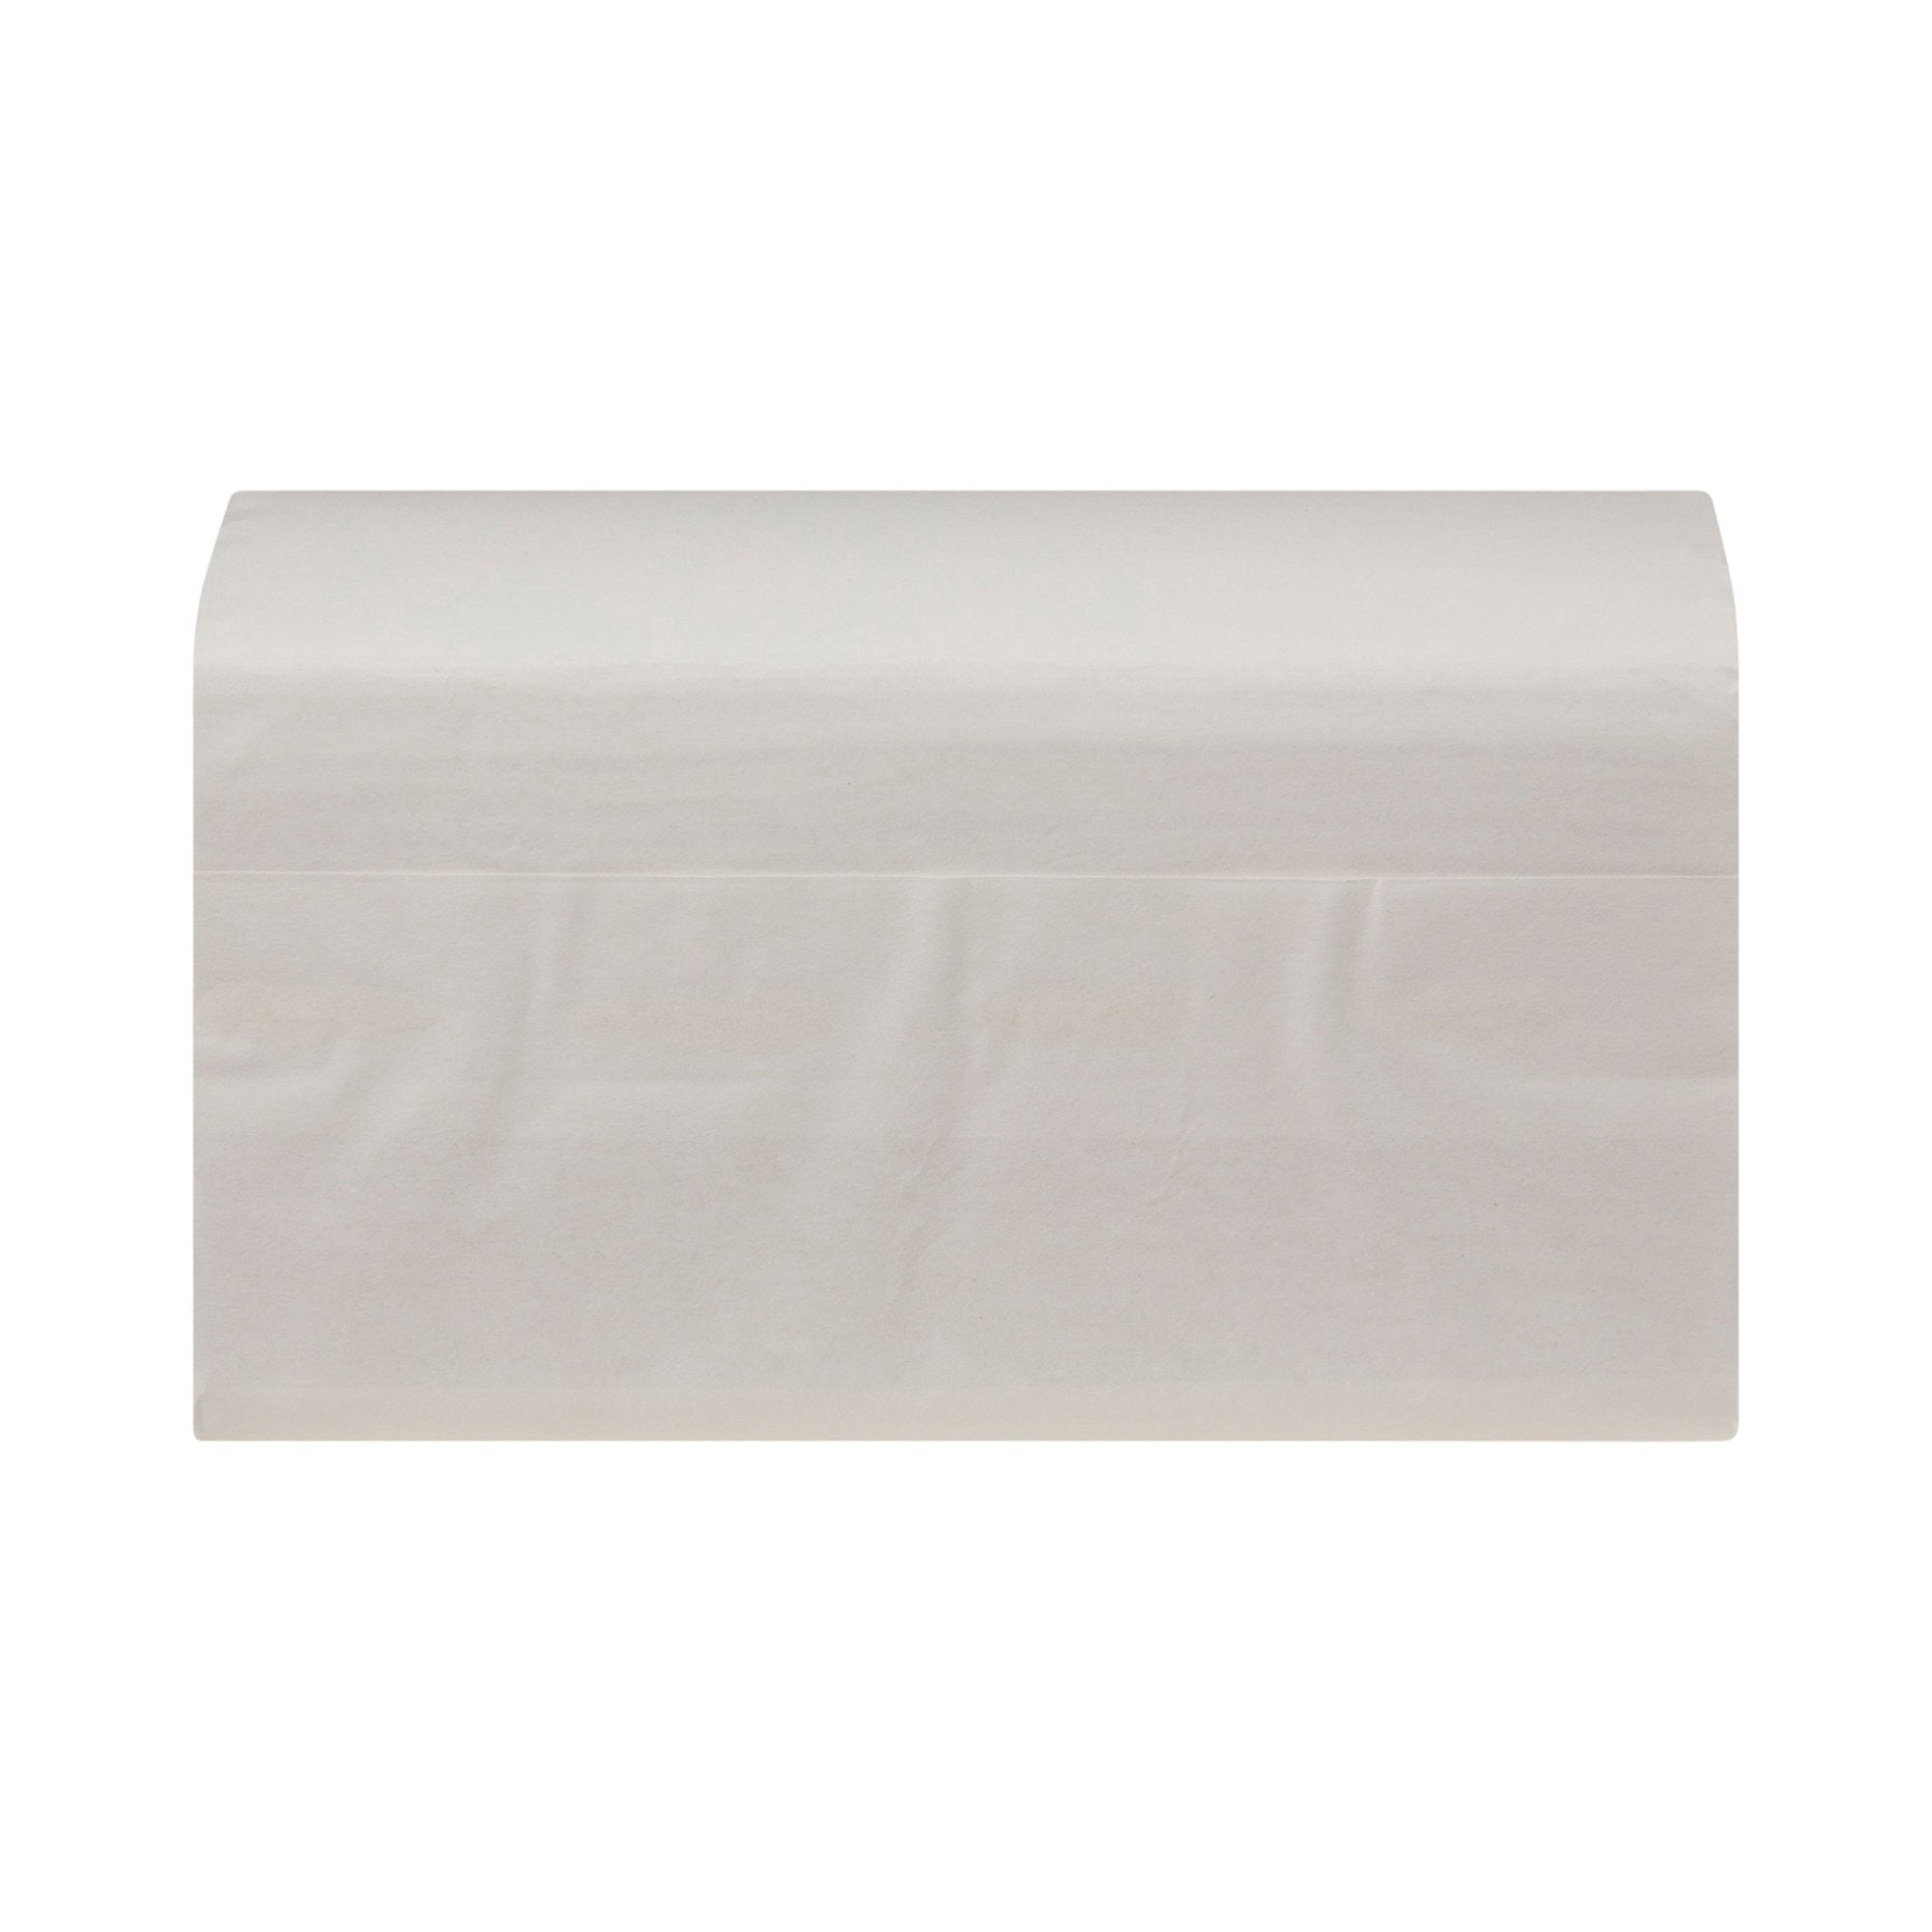 Paper Towel Pacific Blue Select Multi-Fold 9-1/5 X 9-2/5 Inch